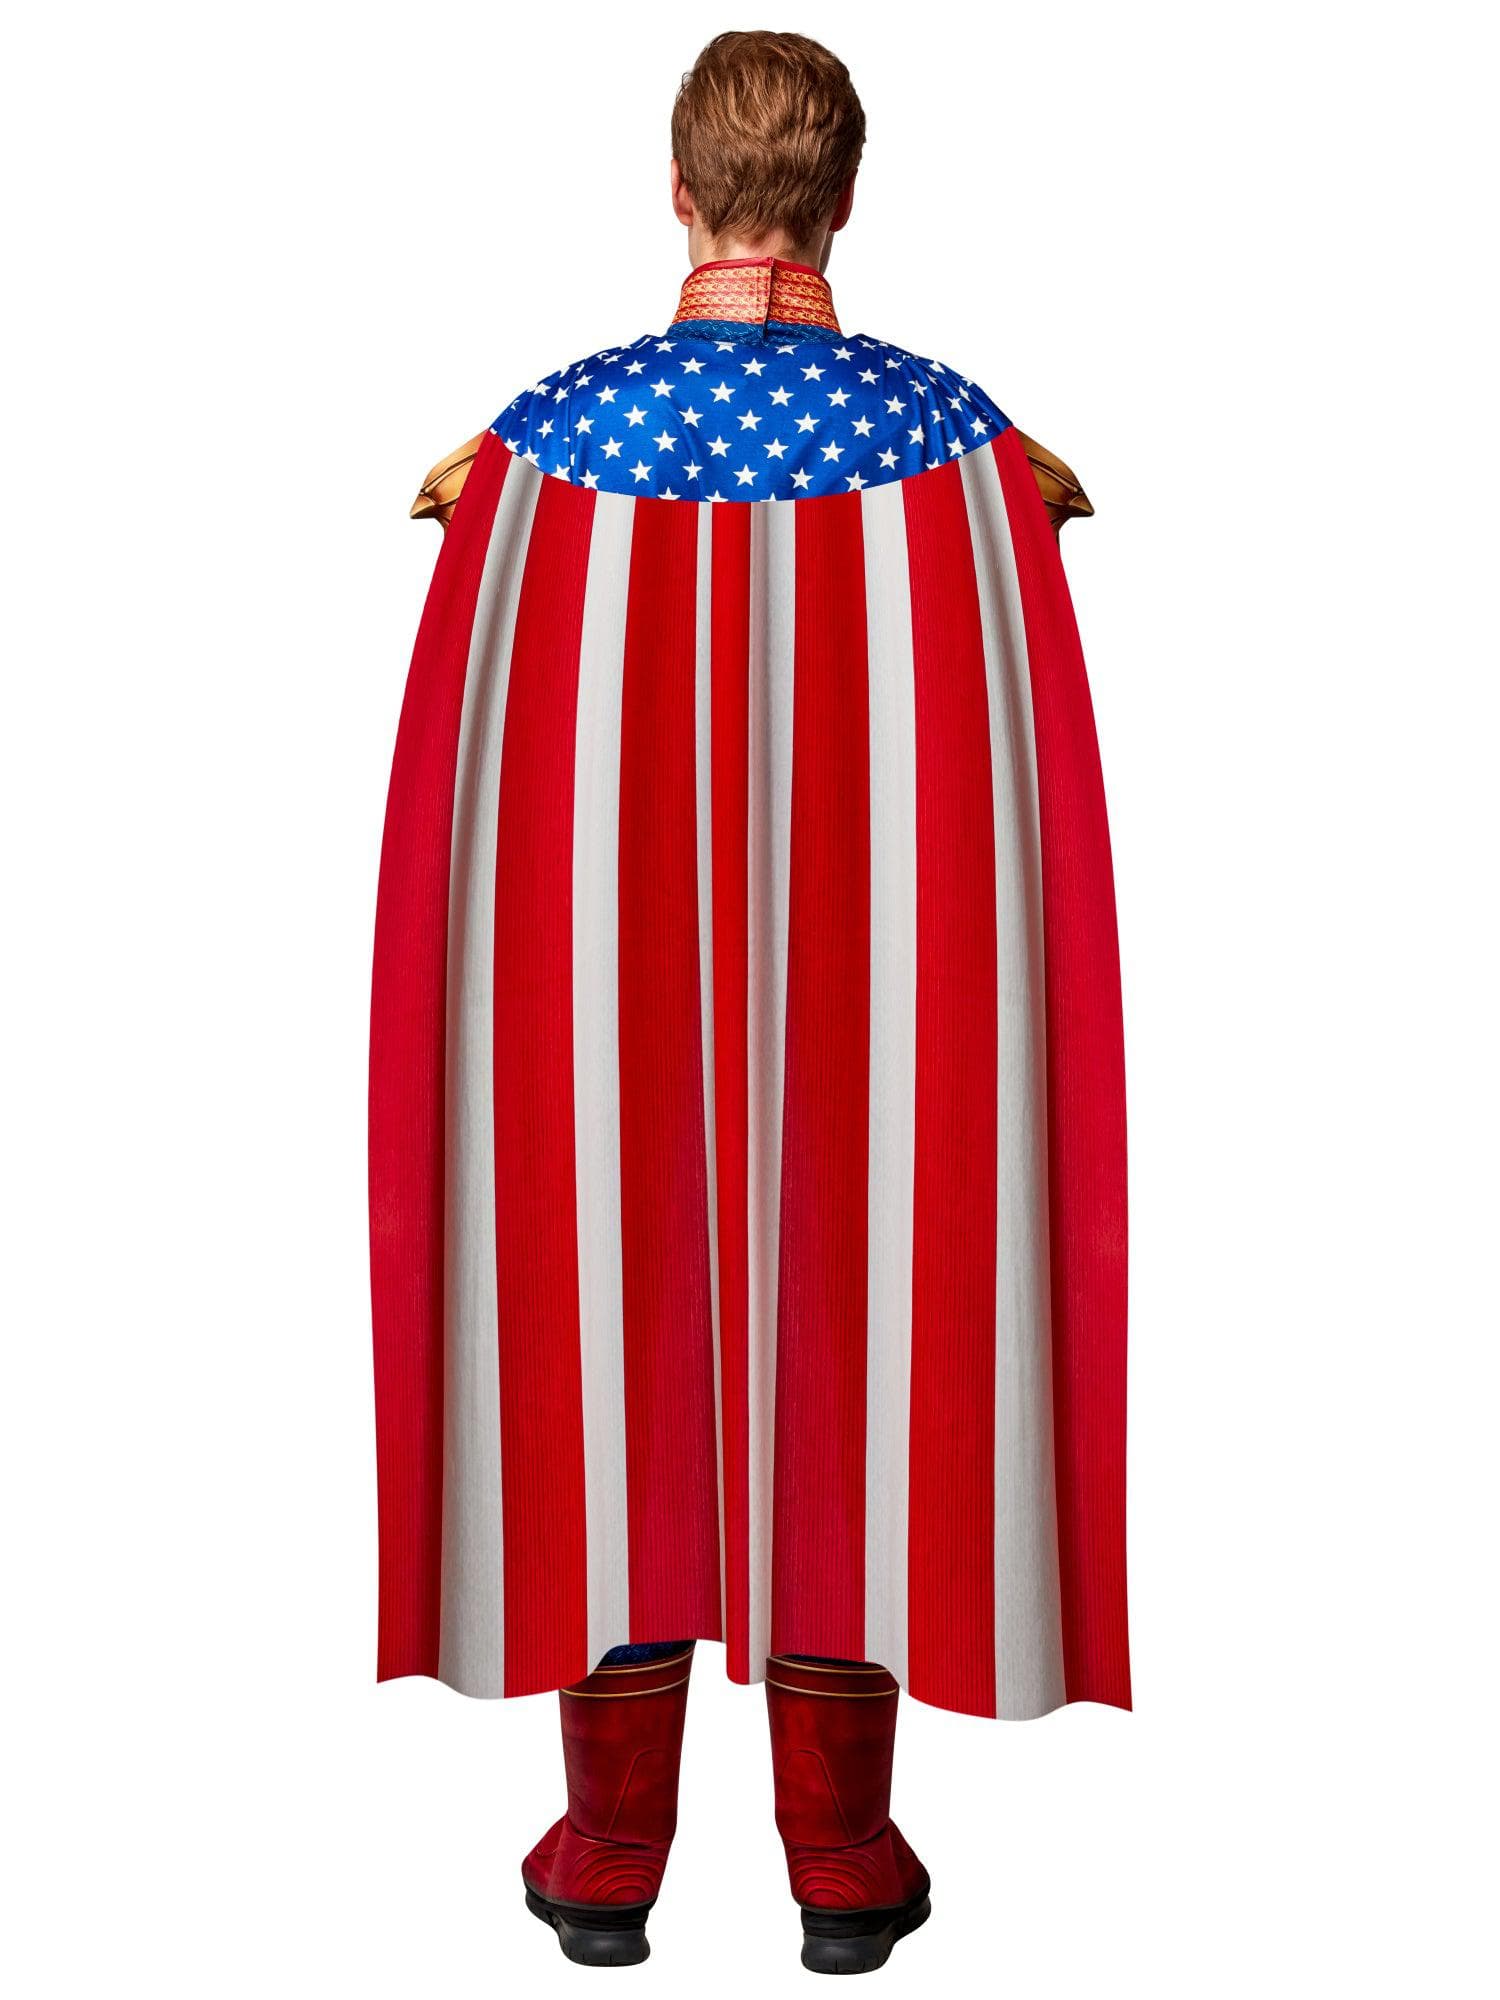 The Boys Homelander Adult Deluxe Costume - costumes.com